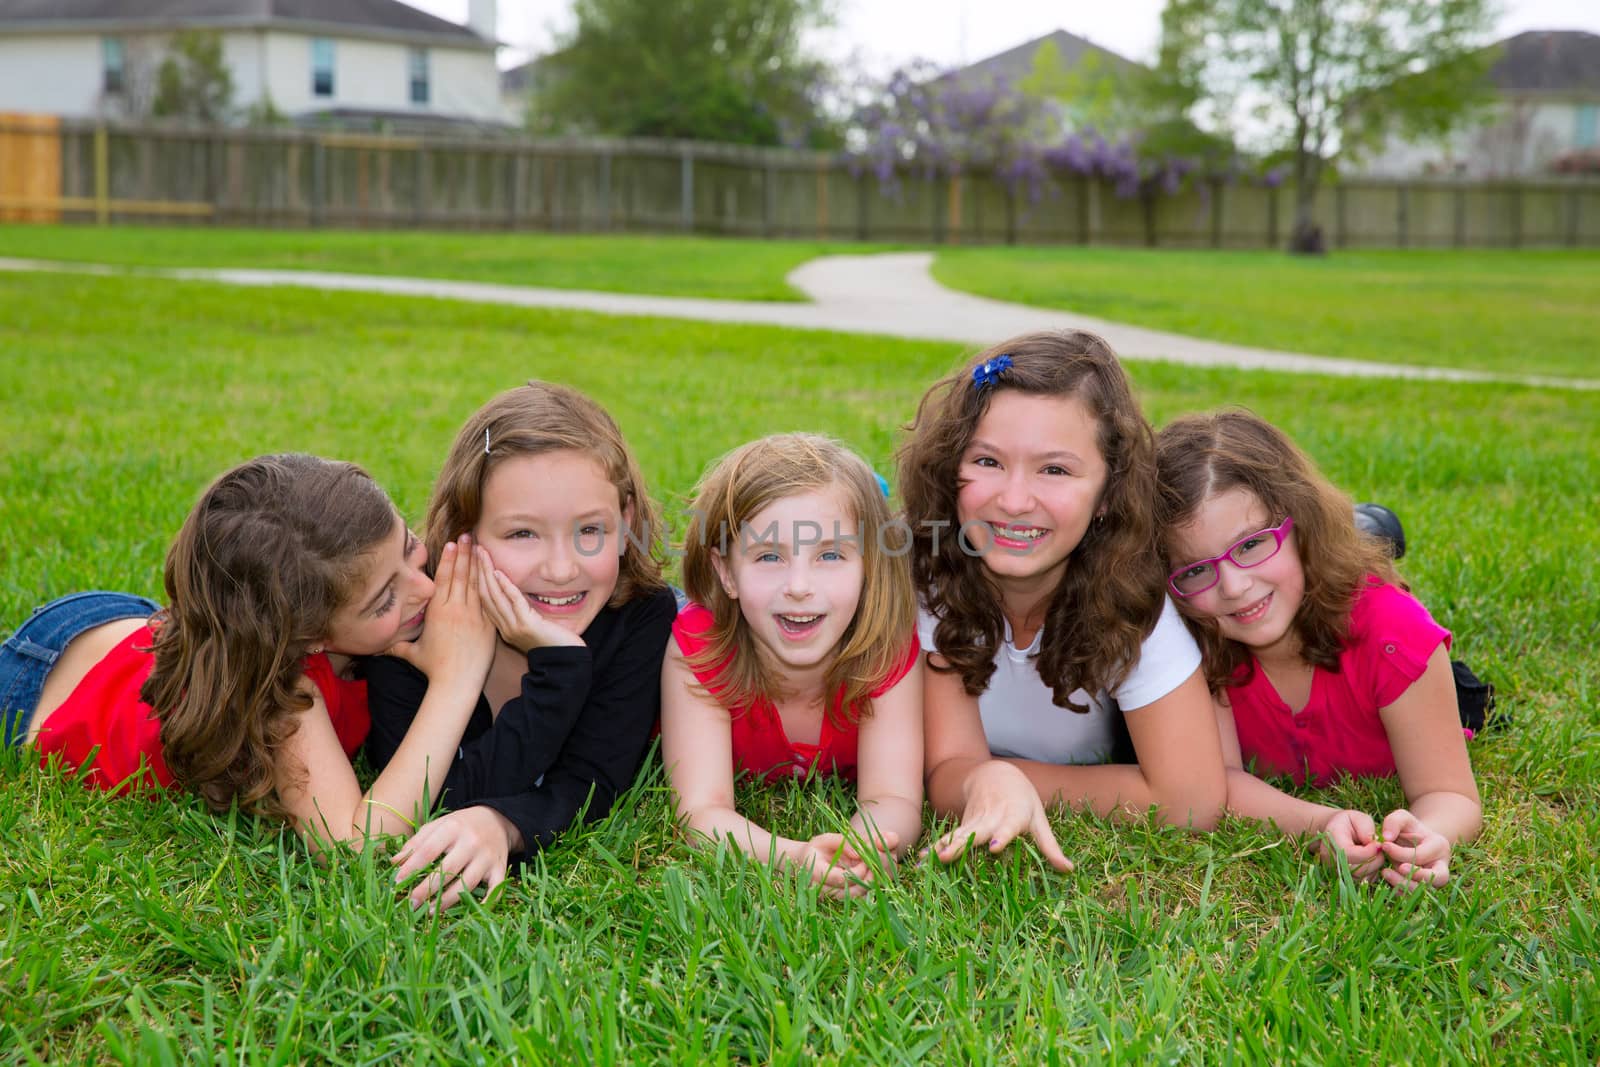 Children girls group lying on lawn grass smiling happy together in a row